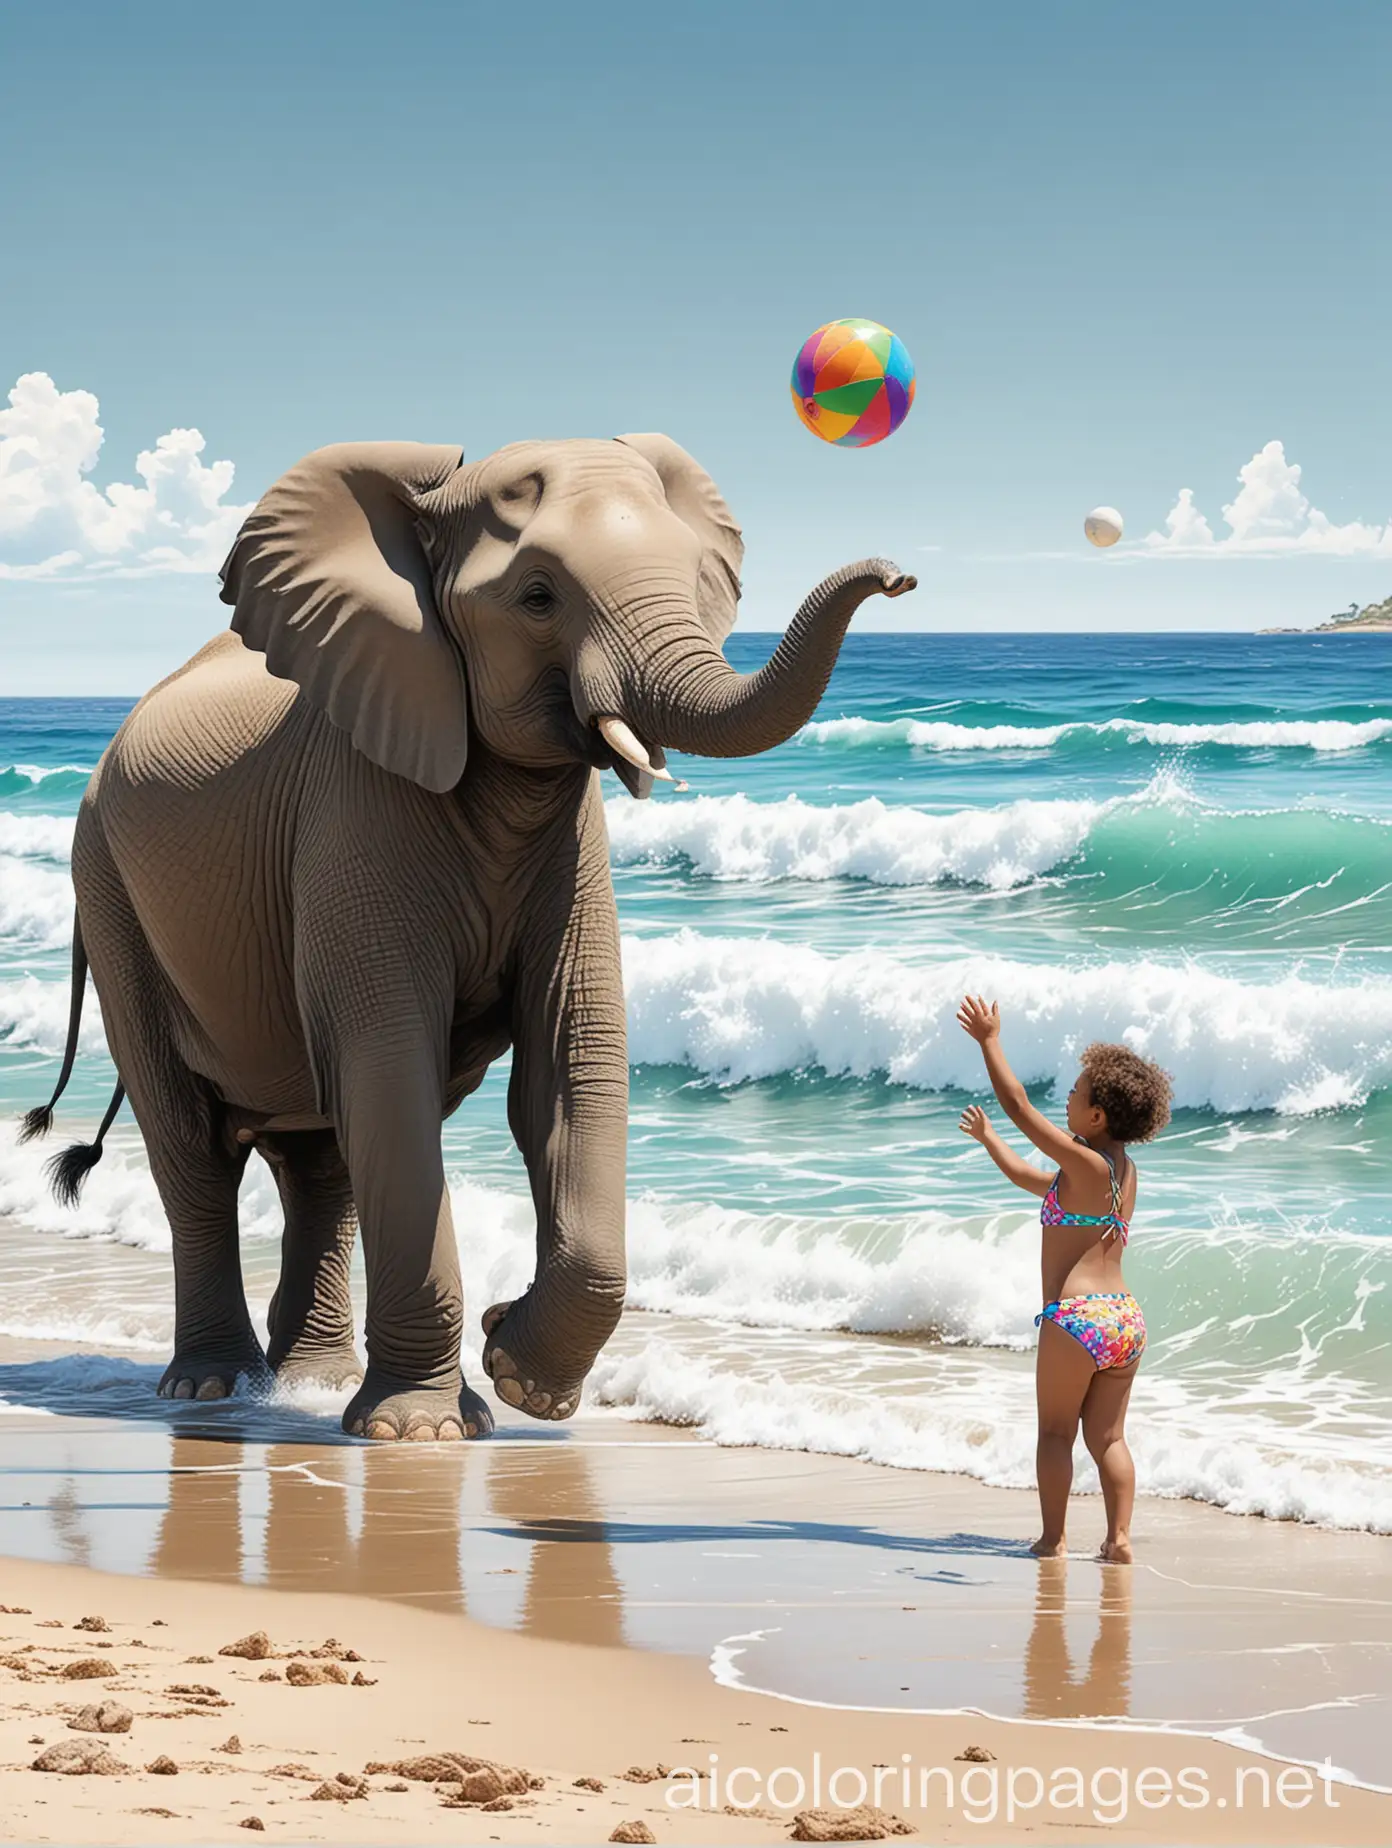  "A joyful scene at the beach where a child is playing with a ball alongside a friendly elephant. The child, dressed in a colorful swimsuit, throws the ball towards the elephant, who eagerly reaches out with its trunk. The calm blue ocean waves gently roll in the background under a bright, clear sky, adding a sense of tranquility to this playful moment.", Coloring Page, black and white, line art, white background, Simplicity, Ample White Space. The background of the coloring page is plain white to make it easy for young children to color within the lines. The outlines of all the subjects are easy to distinguish, making it simple for kids to color without too much difficulty